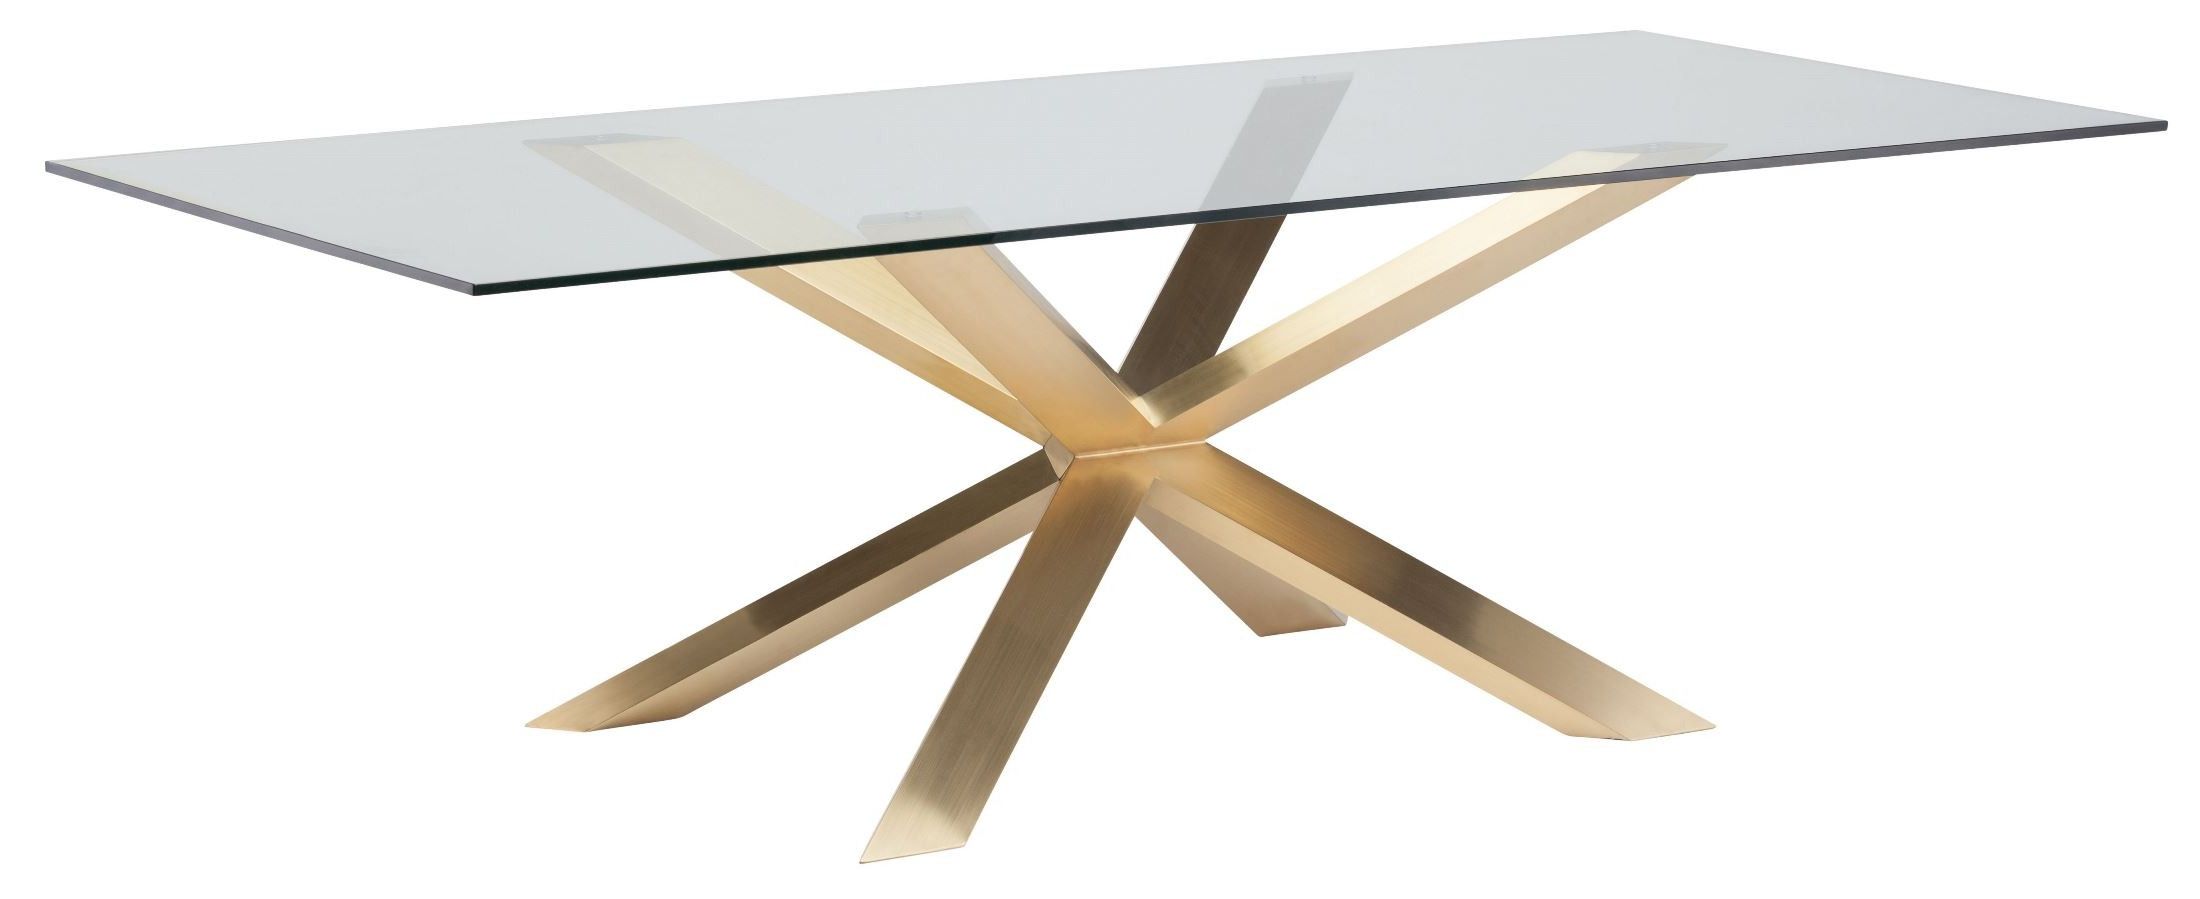 Well Liked Couture 94" Brushed Gold Clear Glass Dining Table From Pertaining To Gold Dining Tables (View 13 of 20)